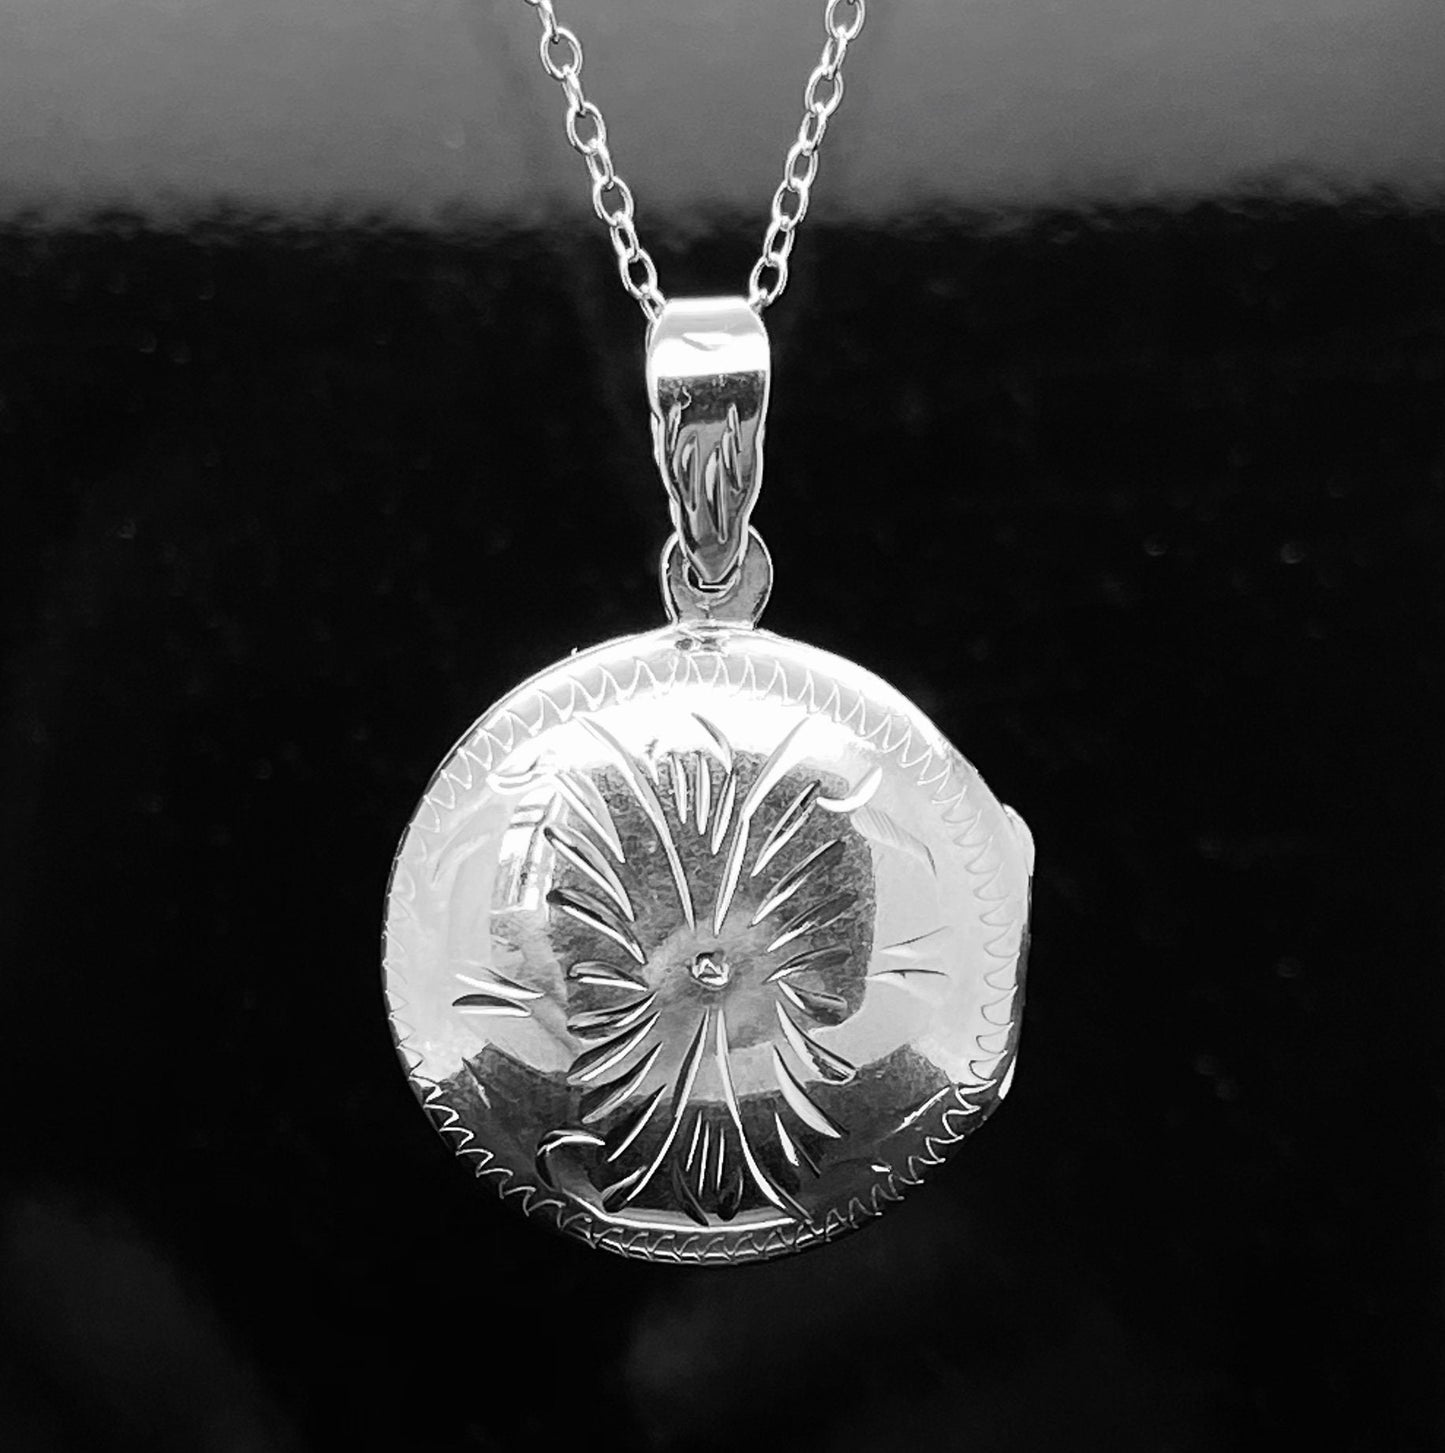 Etched Round Locket Pendant Chain Necklace